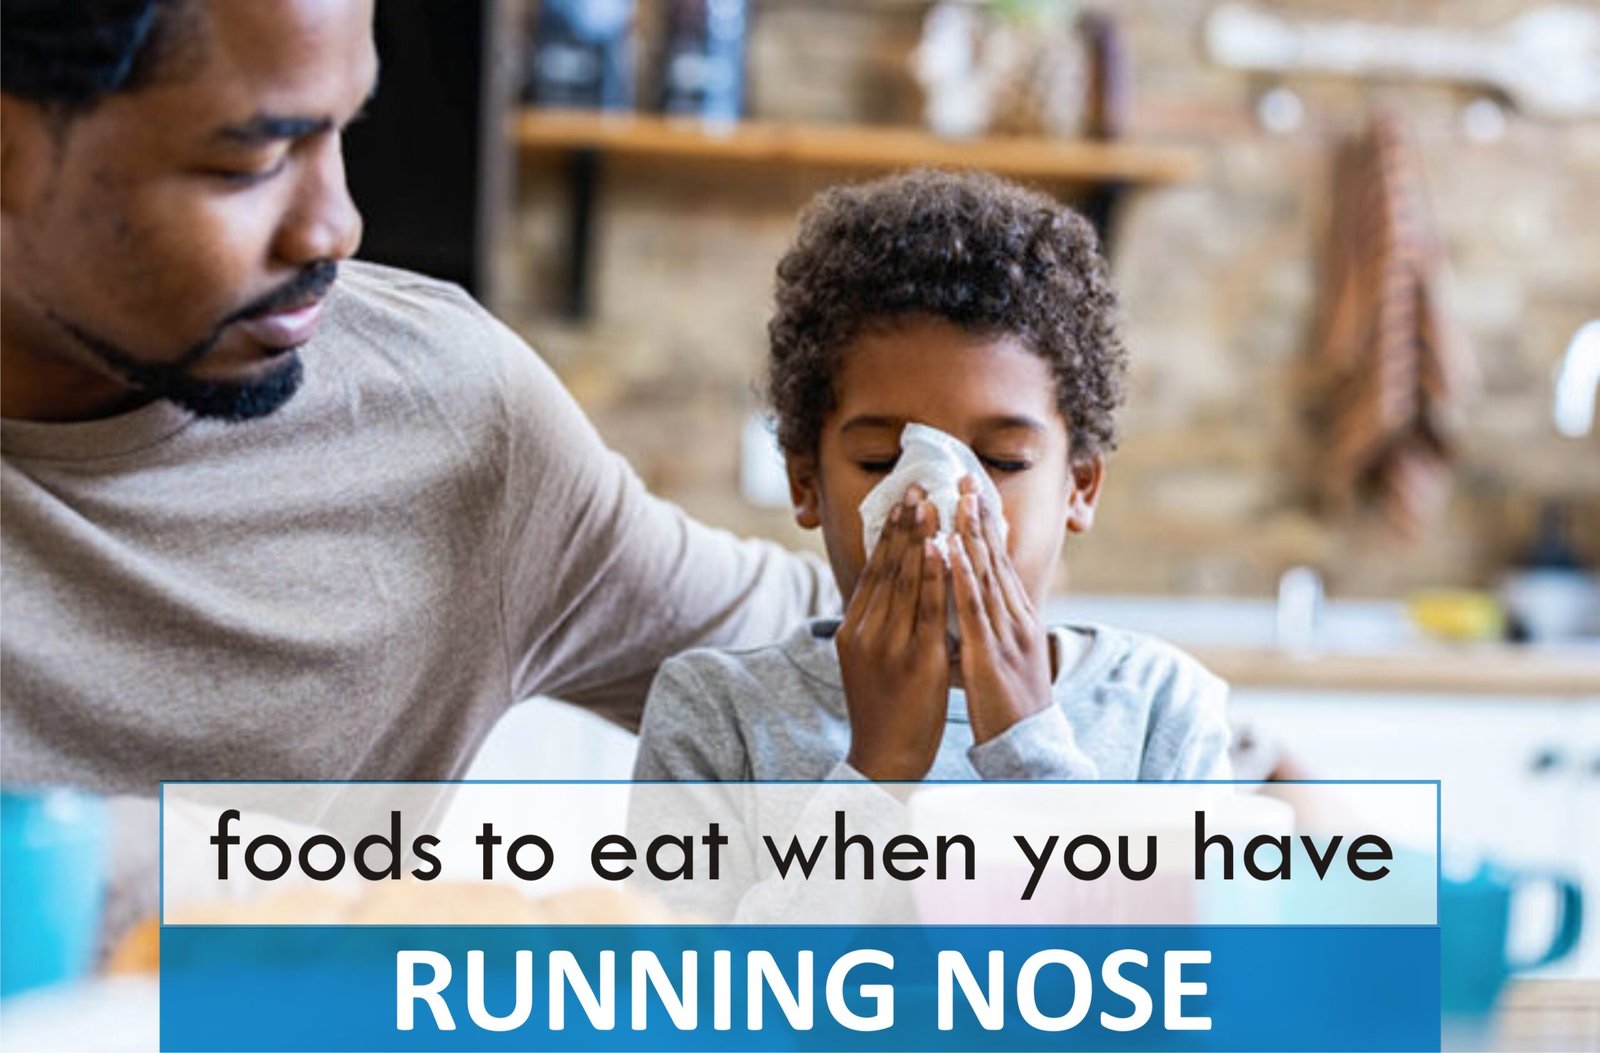 Foods to eat when you have running nose